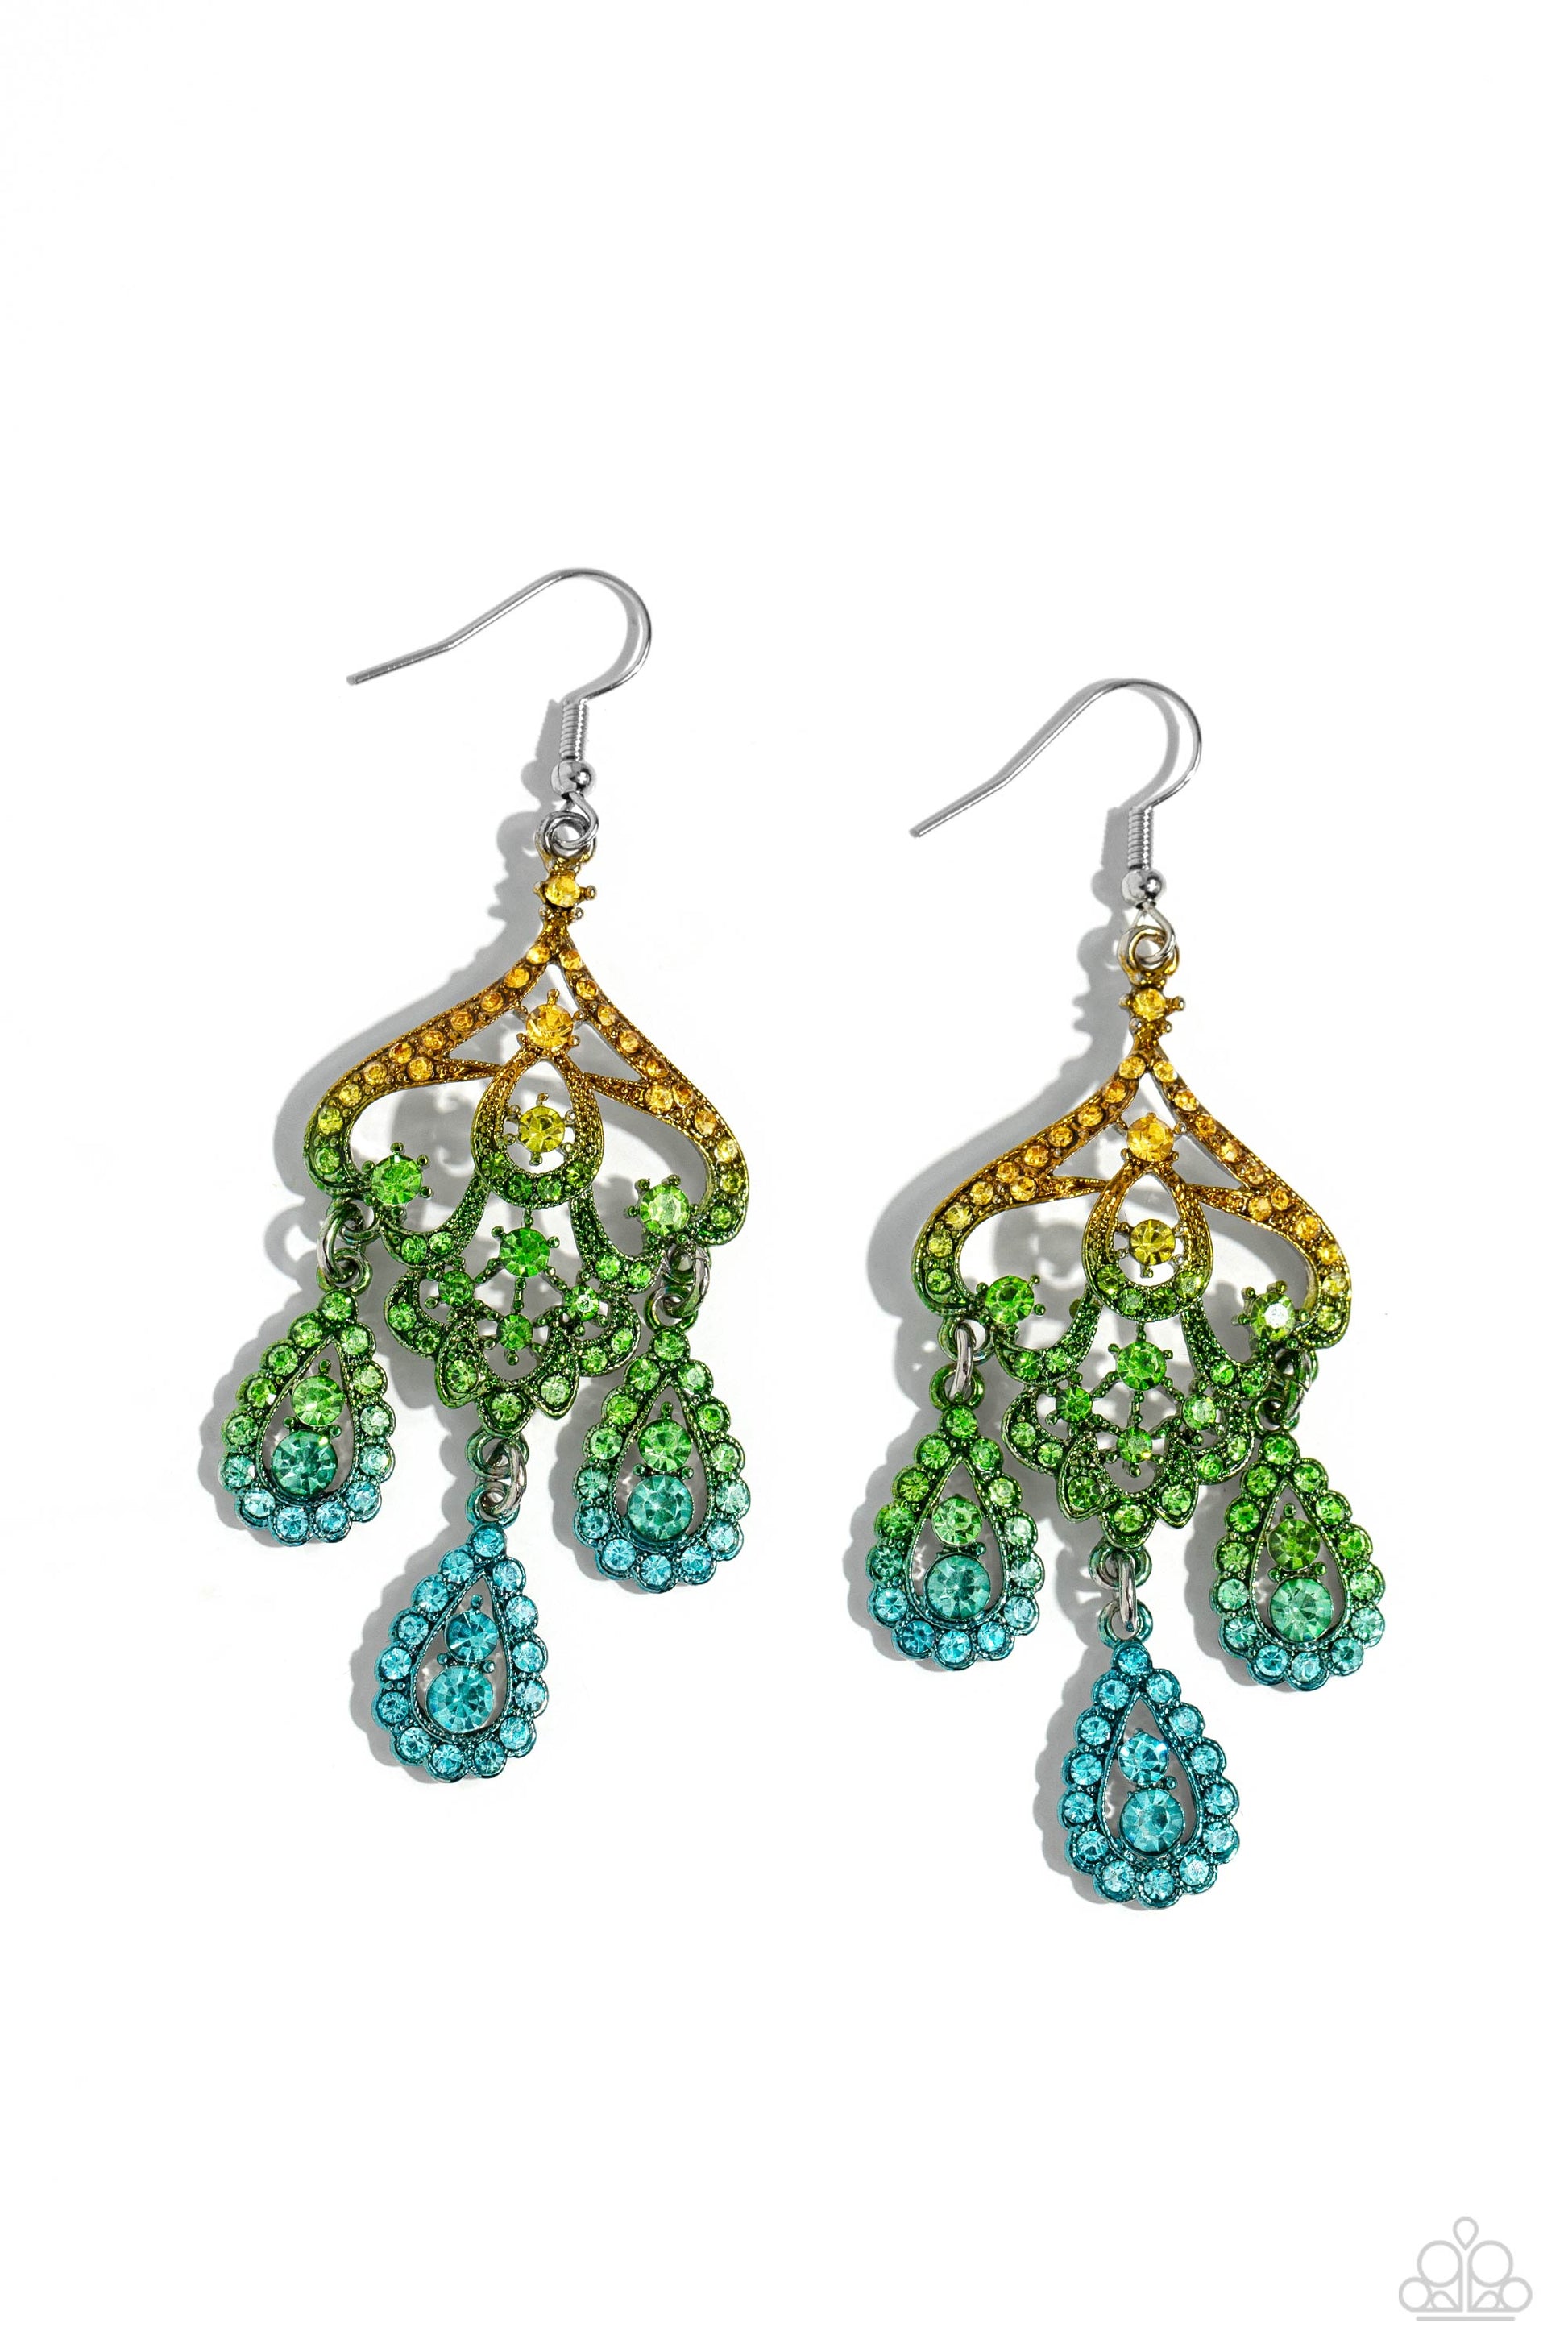 Chandelier Command Multi Earring - Paparazzi Accessories  Three rhinestone-encrusted teardrops drip from the bottom of an ornate decorative frame, creating an elegant fringe. The decorative frame swirls with ombré rhinestones that go from yellow to green to blue shades in varying sizes for a timelessly over-the-top sparkle. Earring attaches to a standard fishhook fitting.  Sold as one pair of earrings.  P5SE-MTXX-172XX